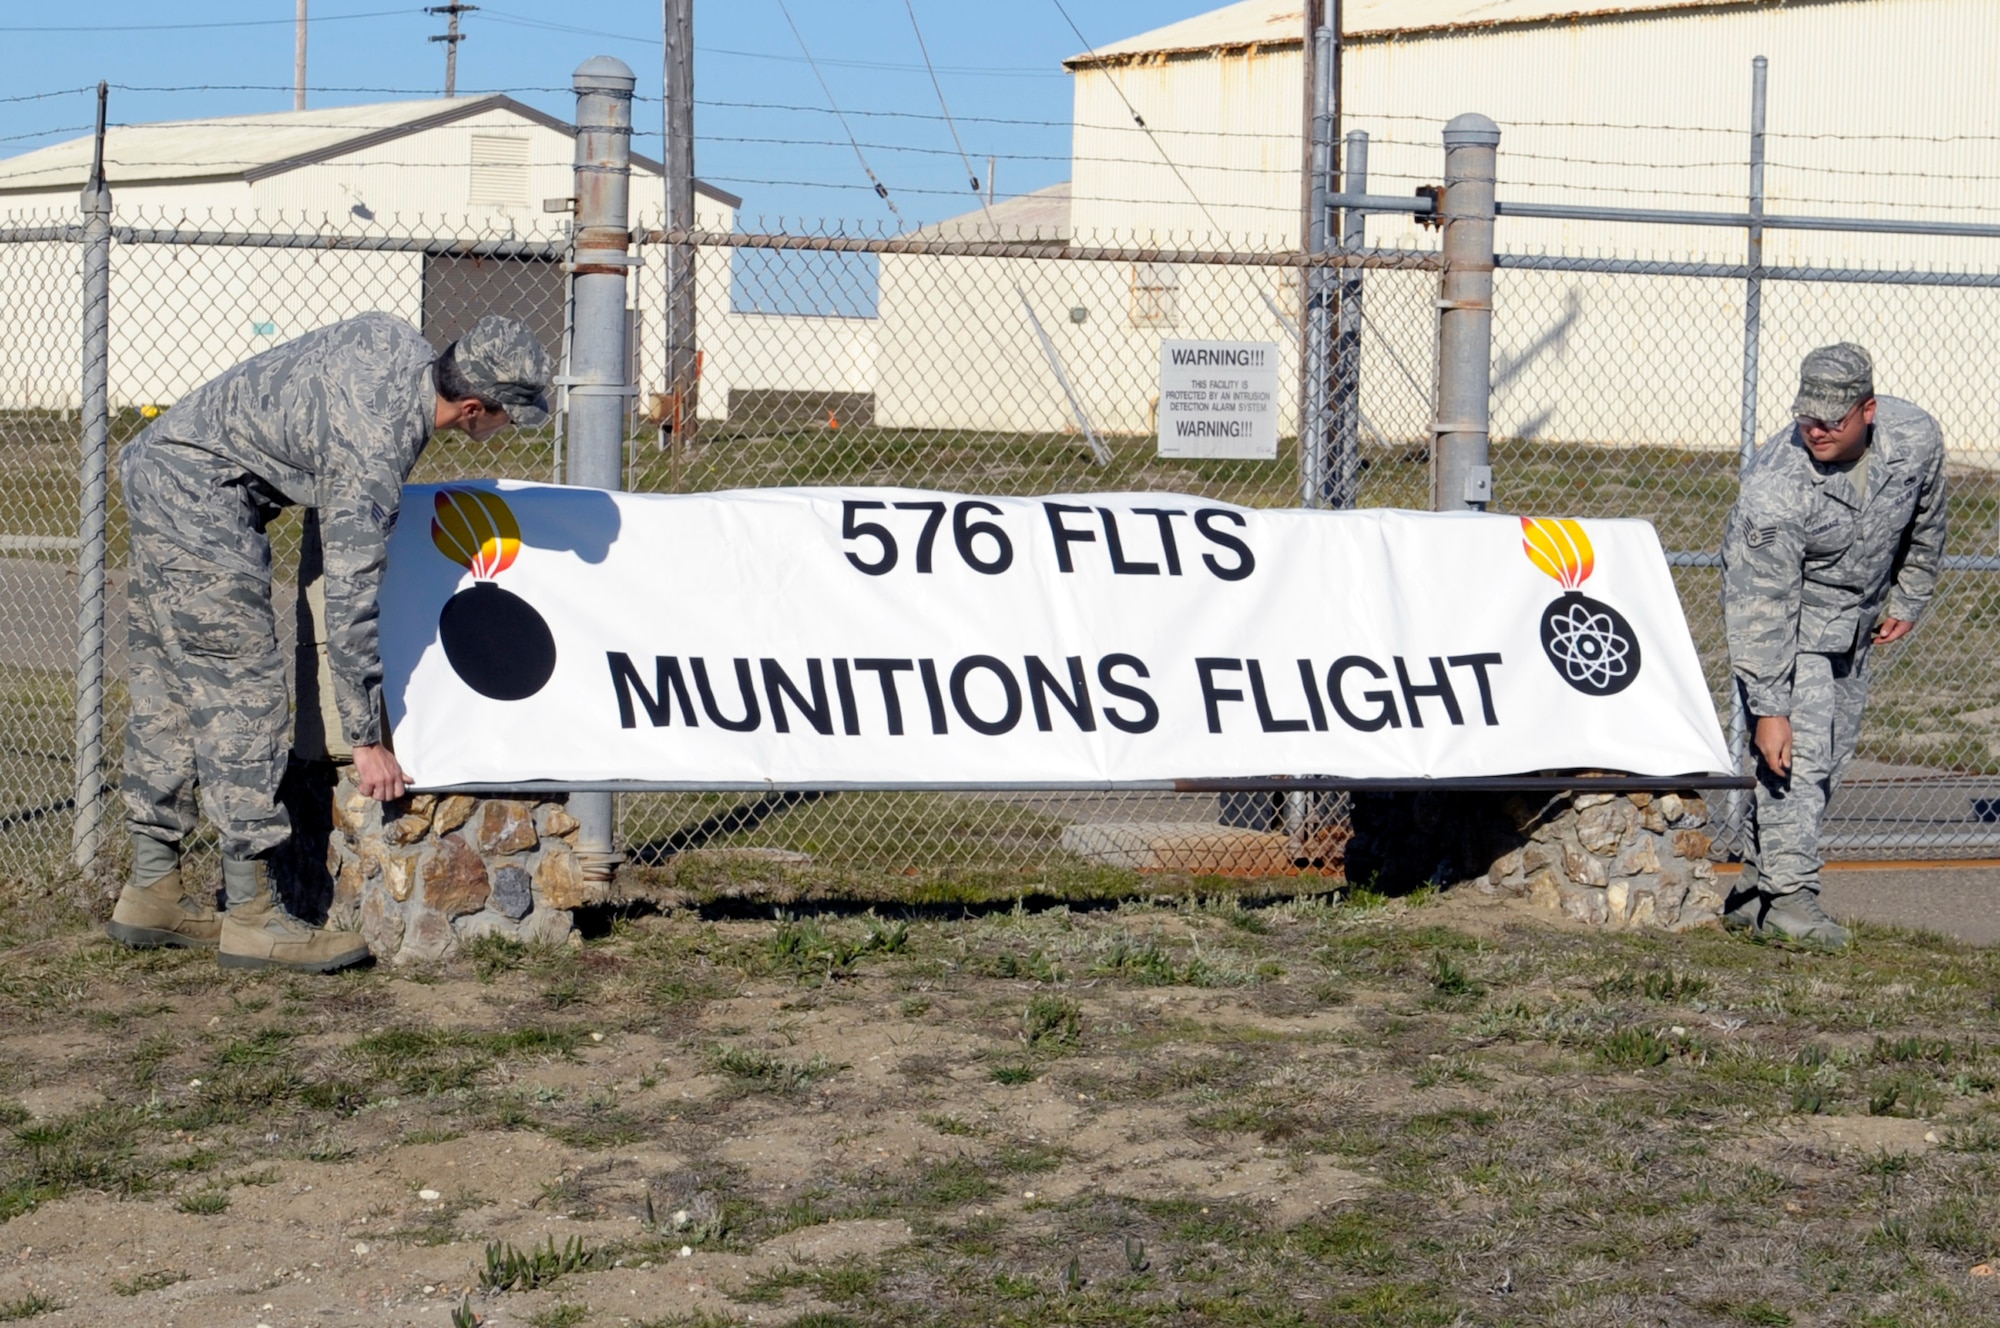 VANDENBERG AIR FORCE BASE, Calif. -- Airmen from 798th Munitions Maintenance Group Detachment 1, reveal their unit’s sign here Tuesday, Dec. 6, 2011. The deactivation is due to a major command change and realignment of functions placing the command, control and authority for the operational mission with the 576th Flight Test Squadron here. (U.S. Air Force photo/Jerry E. Clemens Jr.)

